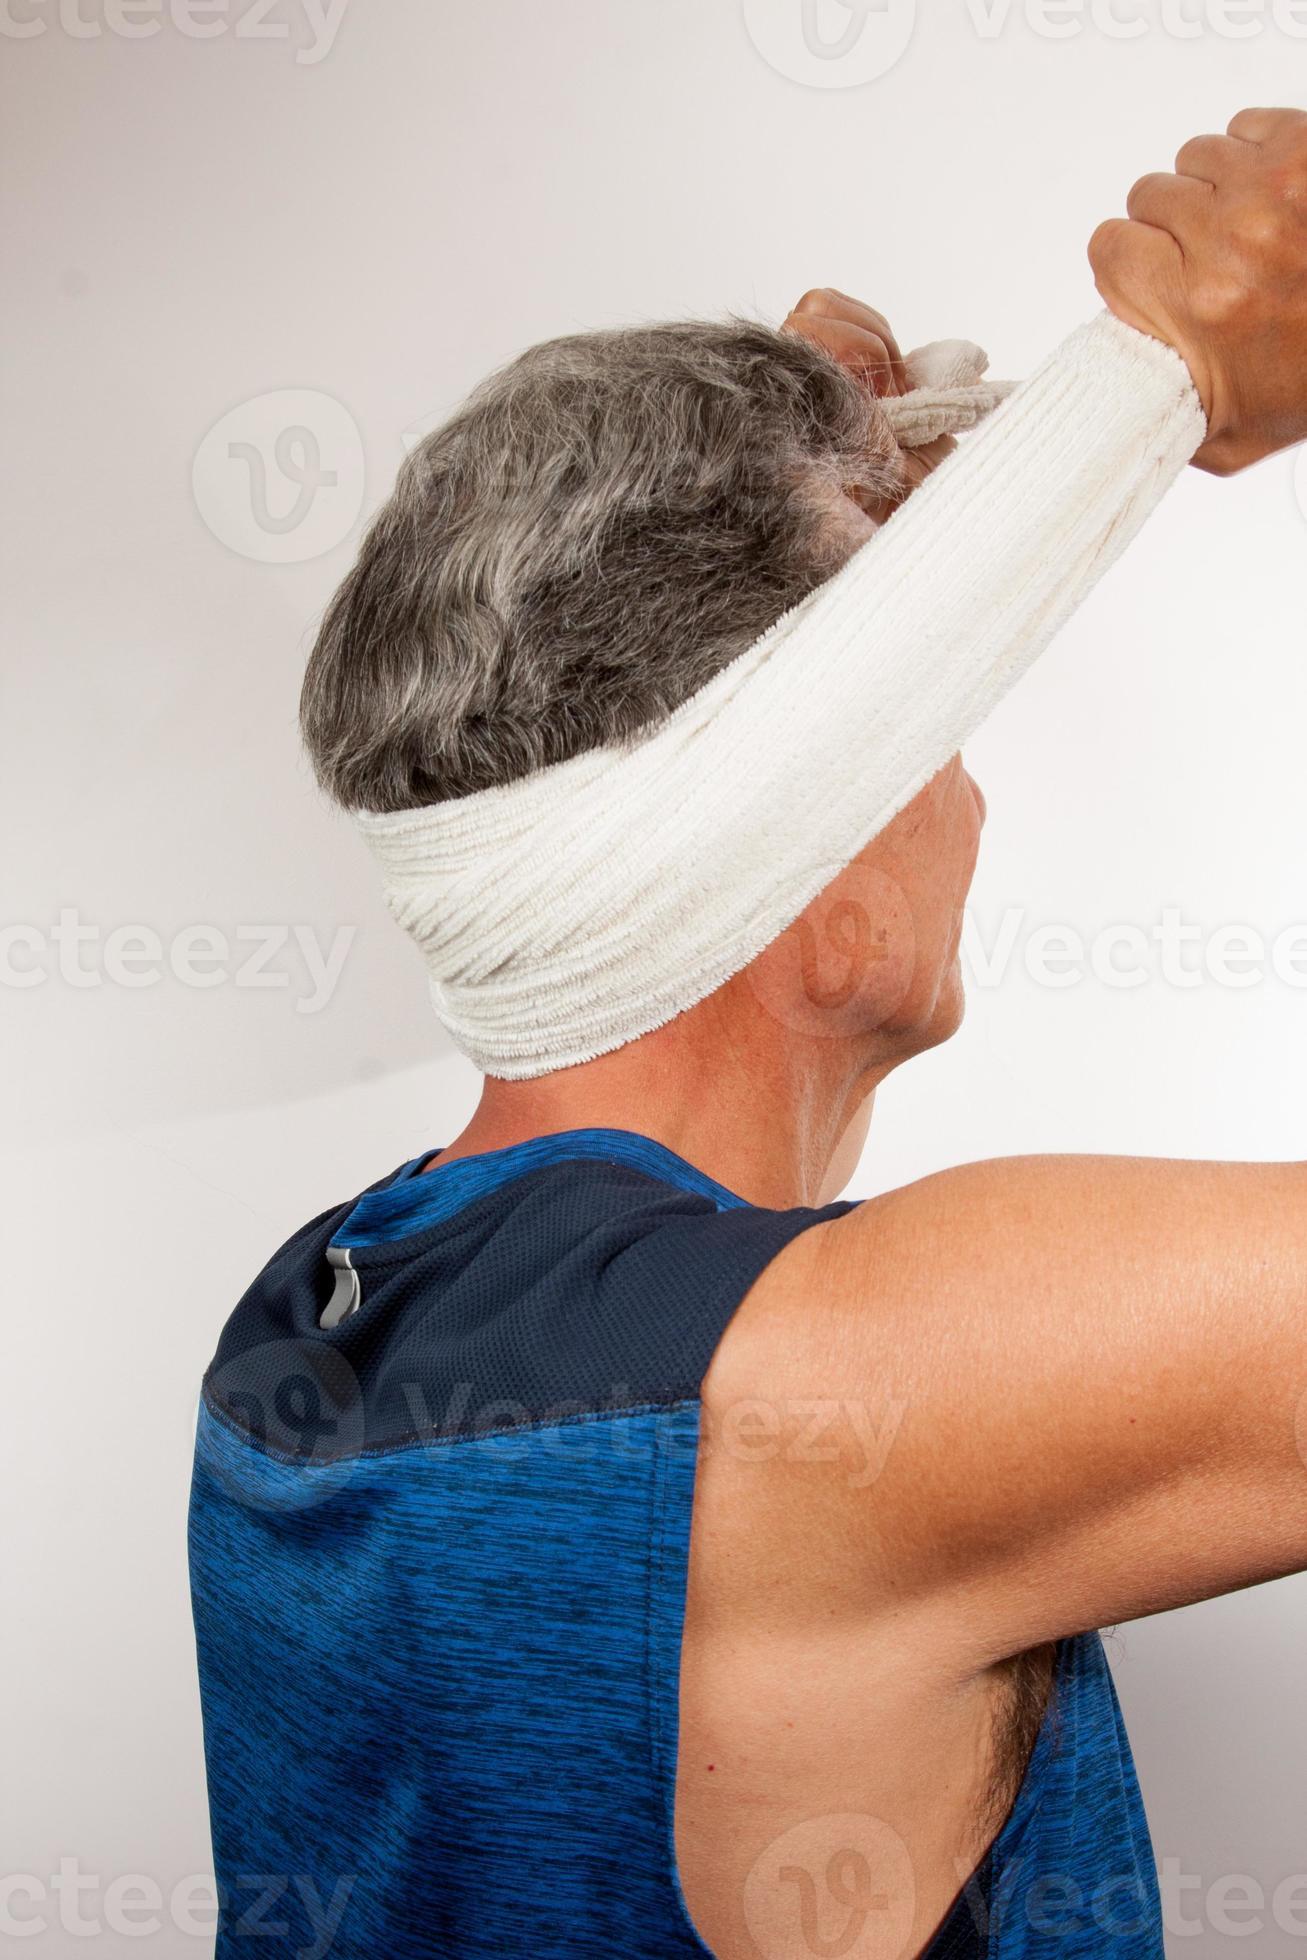 https://static.vecteezy.com/system/resources/previews/010/970/809/large_2x/mature-man-60plus-stretching-out-his-neck-for-pain-relief-with-a-towel-photo.jpg